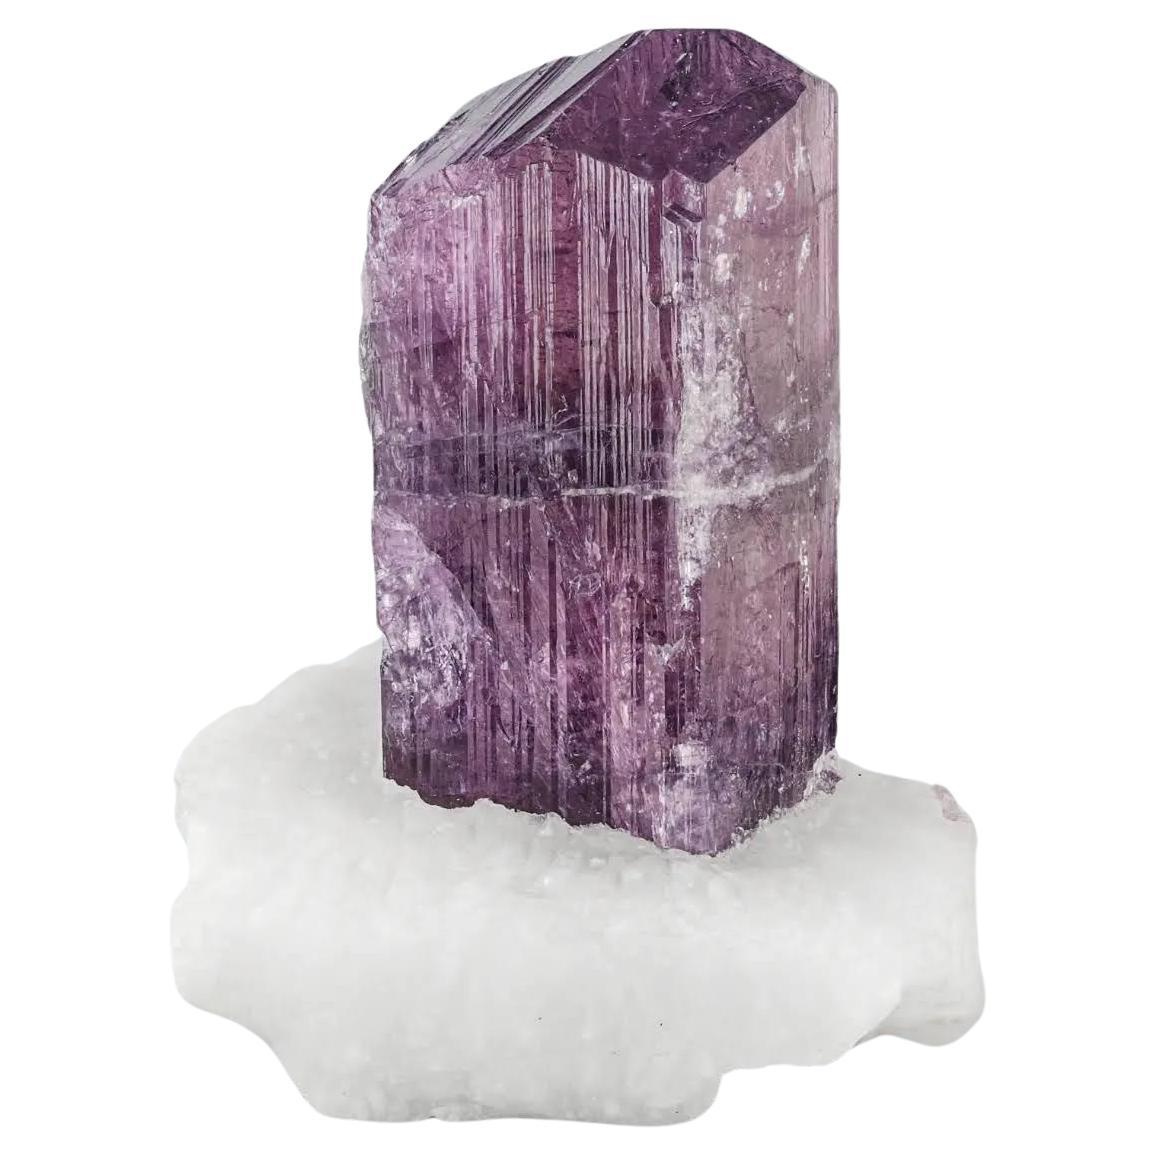 Vibrant Purple Color Scapolite Crystal On Calcite Matrix From Afghanistan